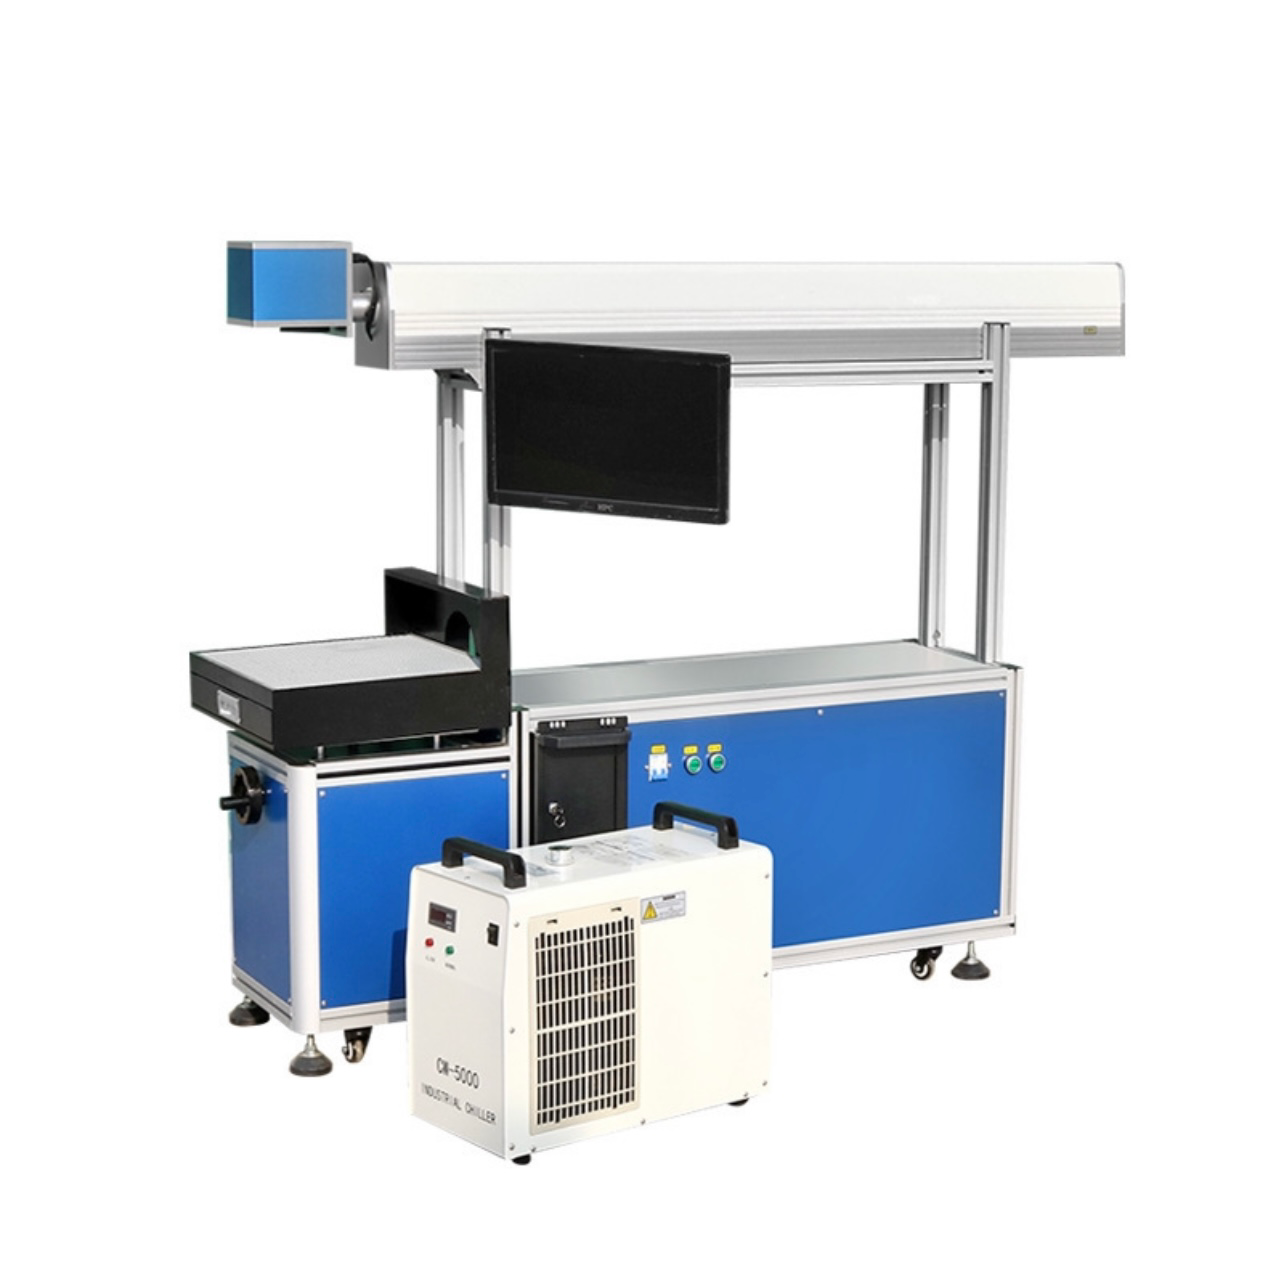 70w glass tube CO2 laser desktop machine for high-speed and smooth marking, clear rejection of blurring, Haoxiang, large-scale bamboo and wood